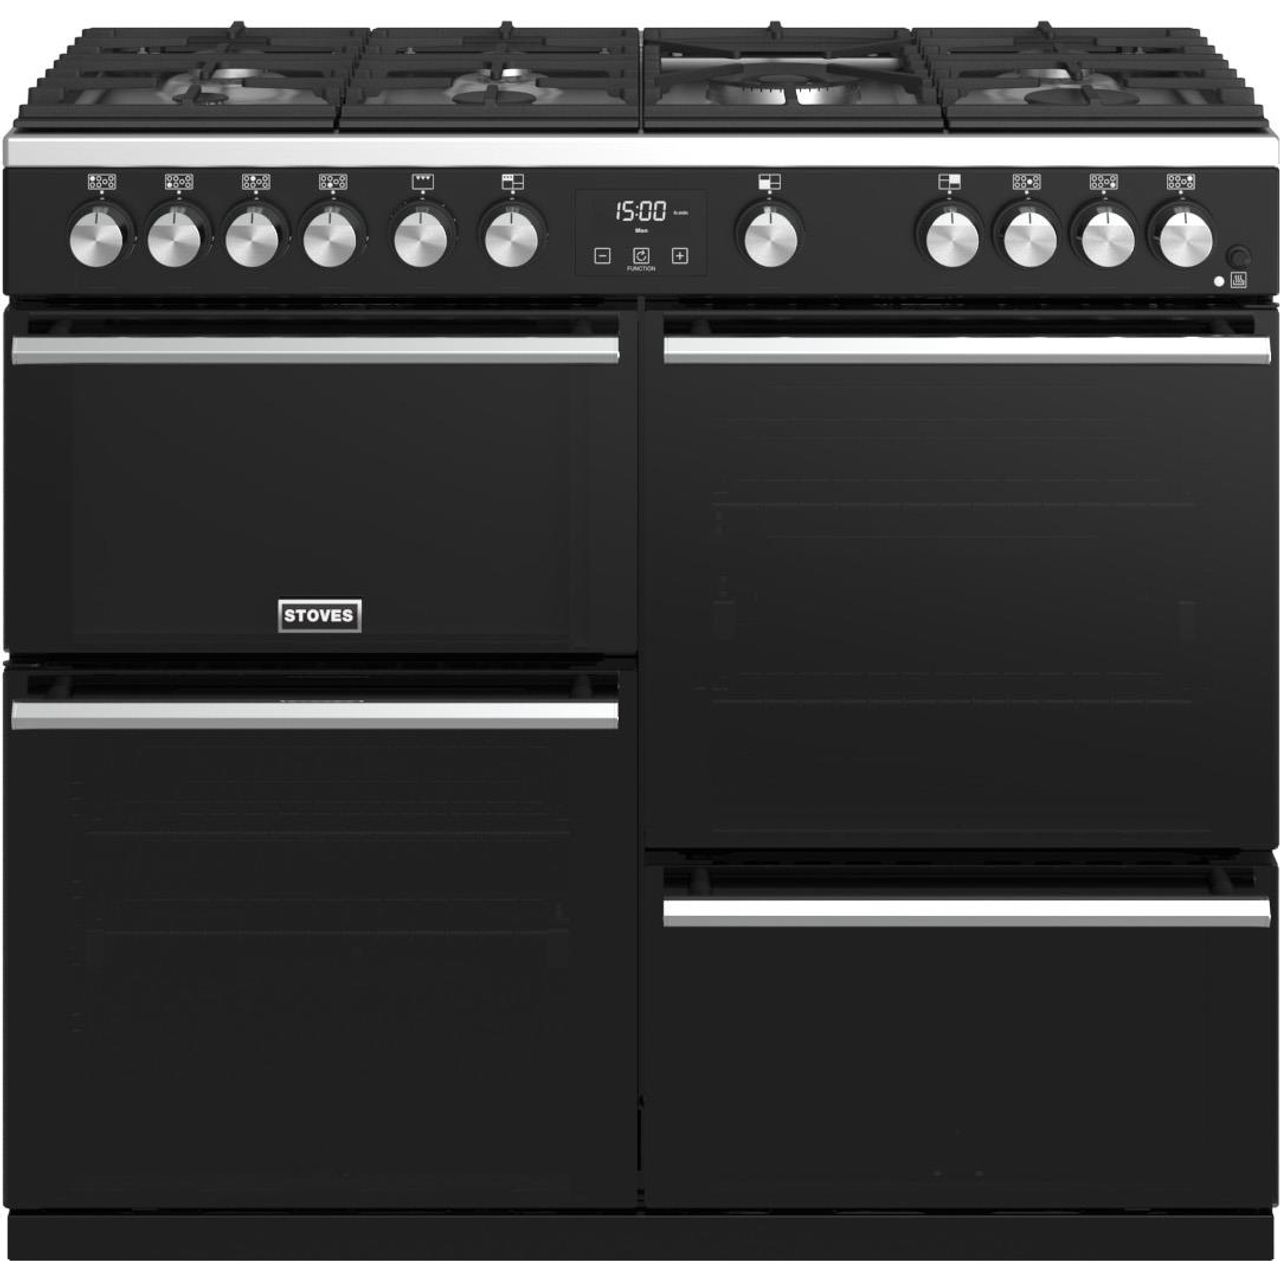 Stoves Precision DX S1000G 100cm Gas Range Cooker with Electric Grill Review